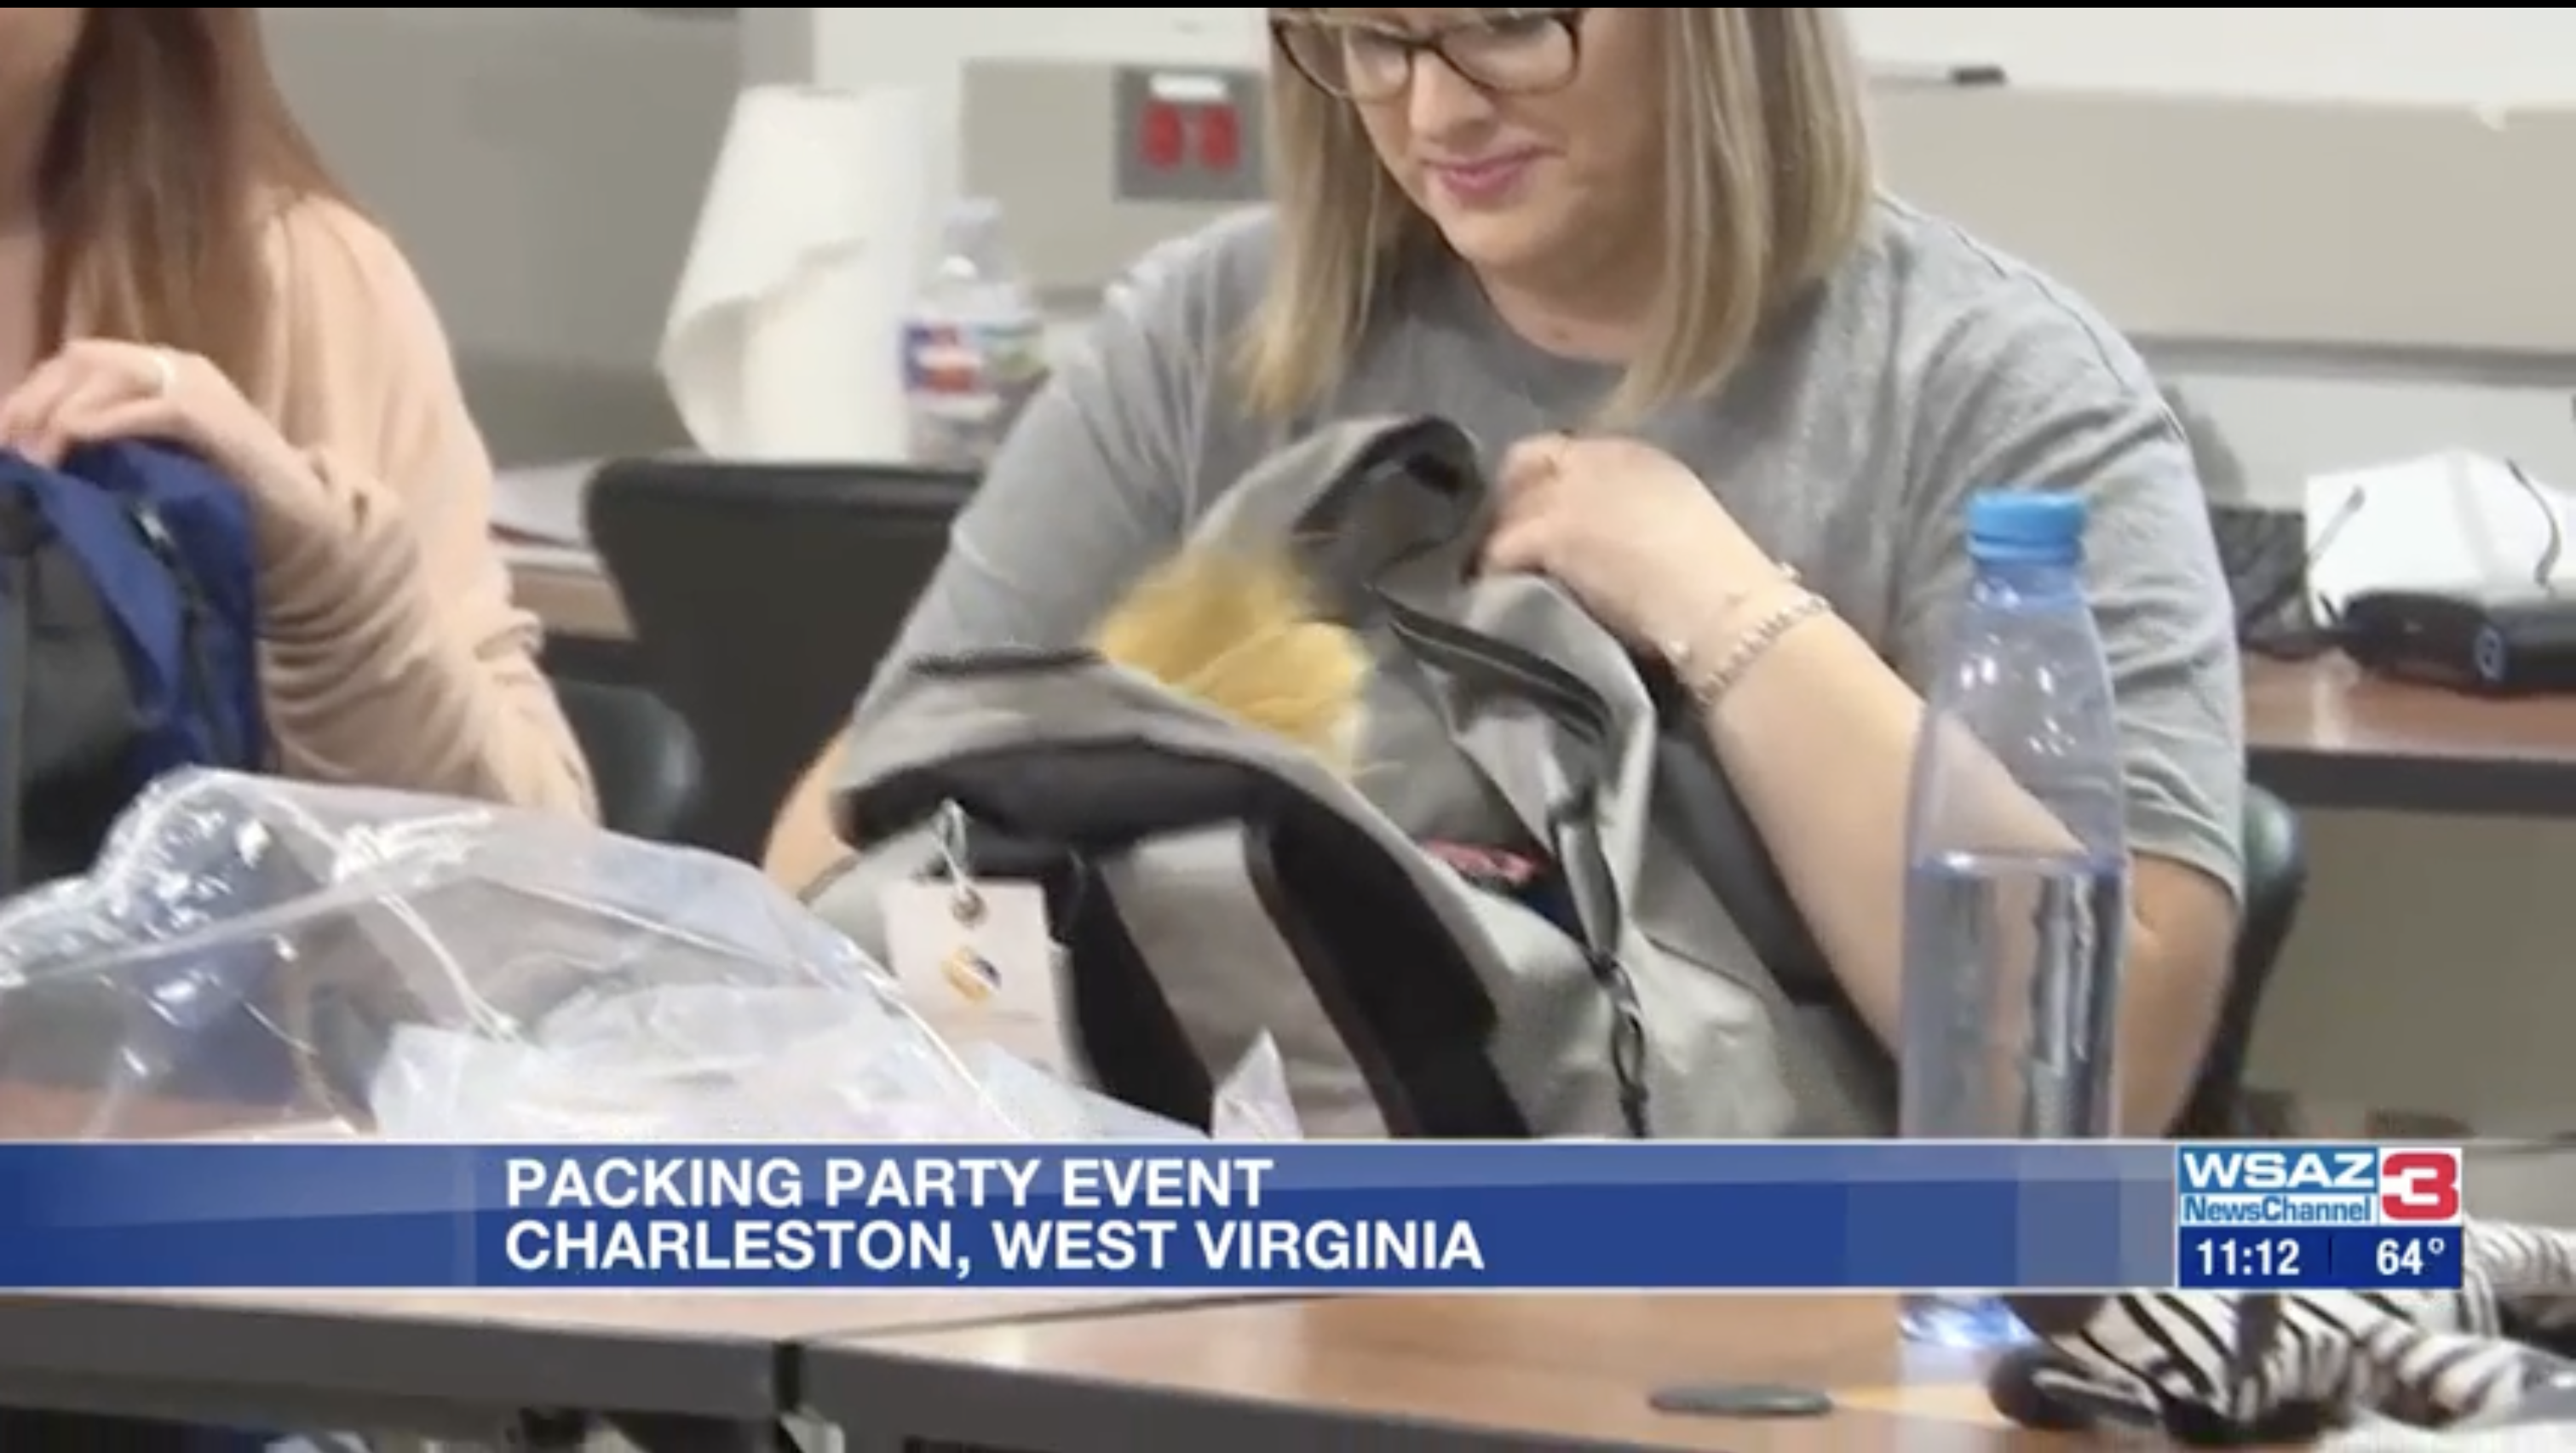 Packing Party Event in Charleston, West Virginia